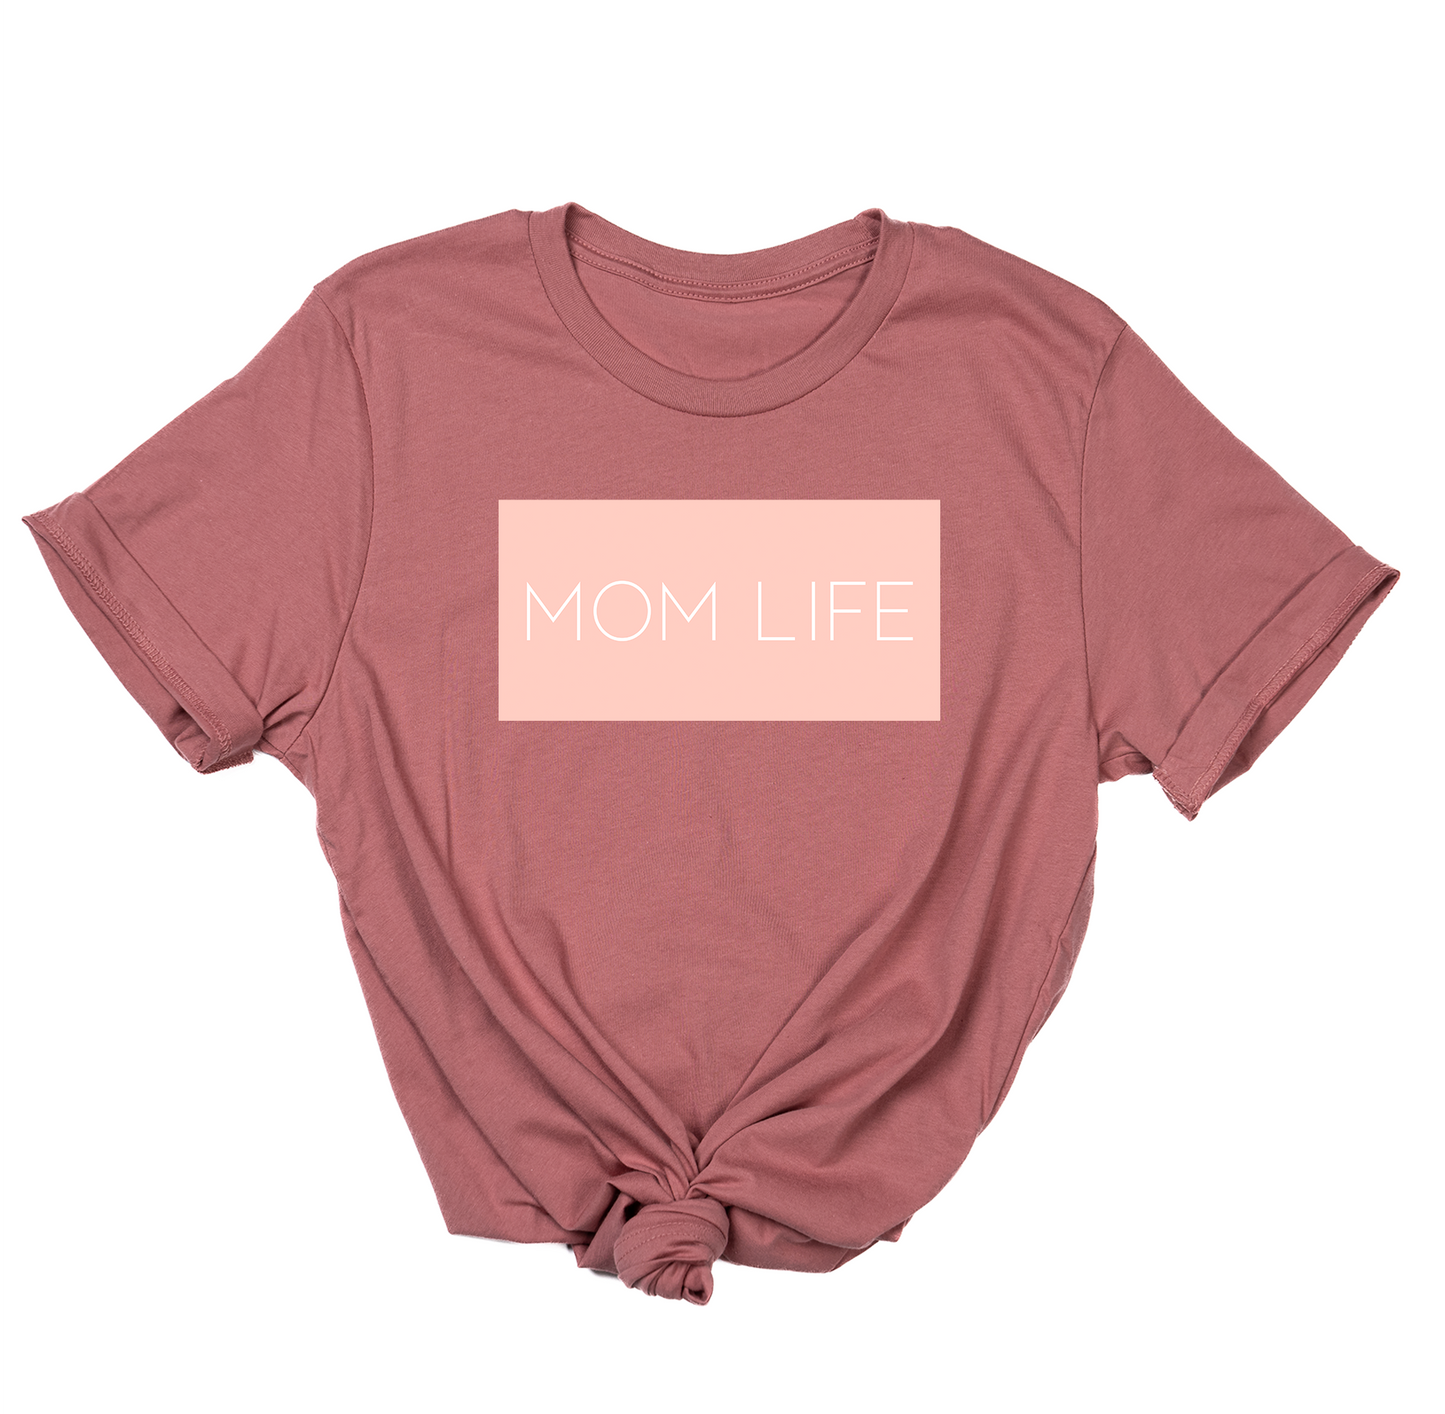 Mom Life (Boxed Collection, Ballerina Pink Box/White Text, Across Front) - Tee (Mauve)